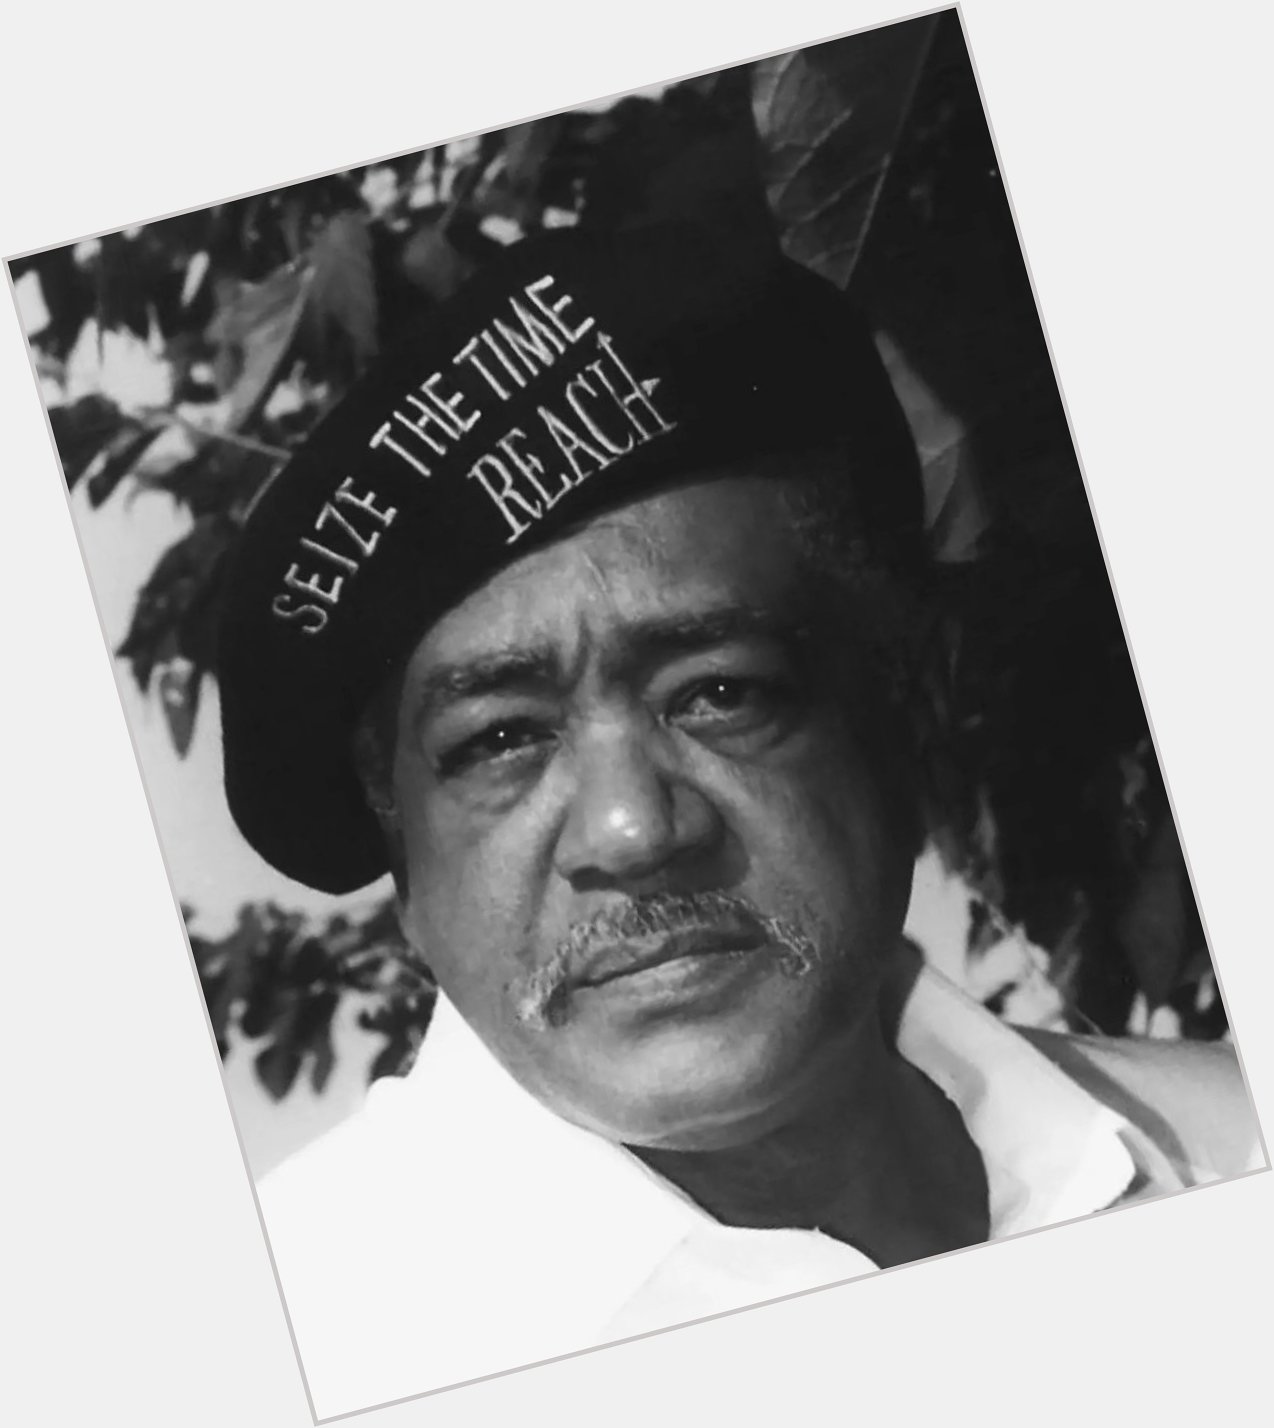 Happy 85th birthday to Black Panther co-founder and author, Bobby Seale. 